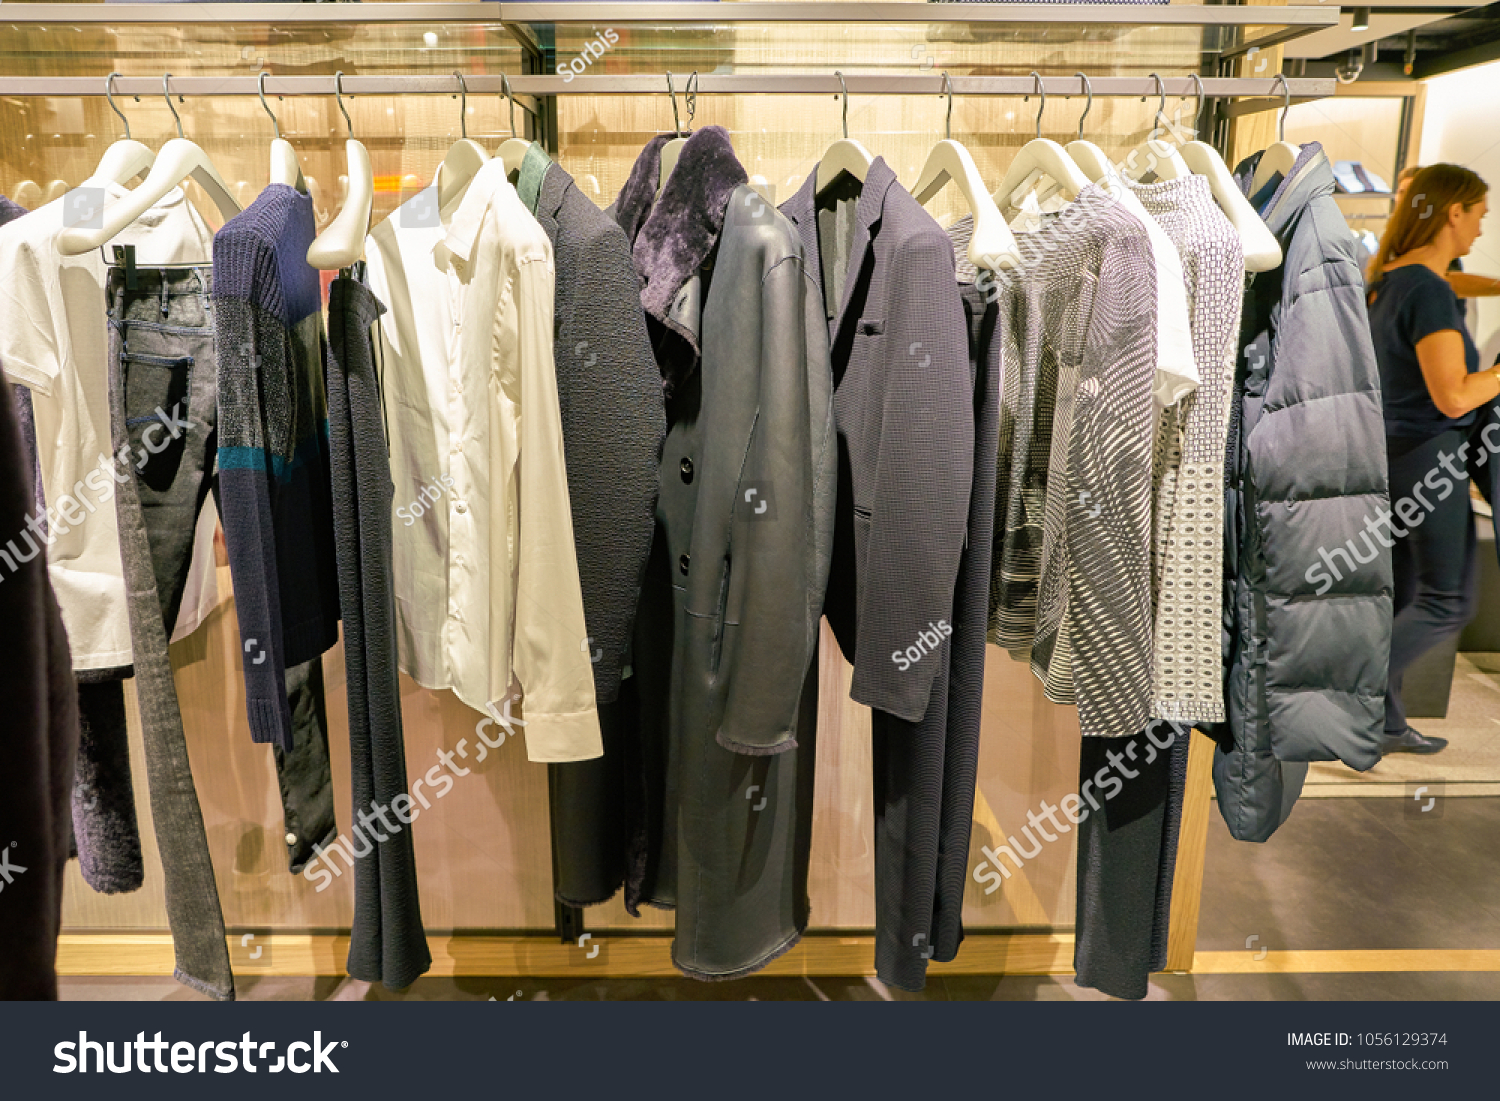 MILAN, ITALY - CIRCA NOVEMBER, 2017: various of clothes on display at Rinascente. Rinascente is a collection of high-end stores. #1056129374